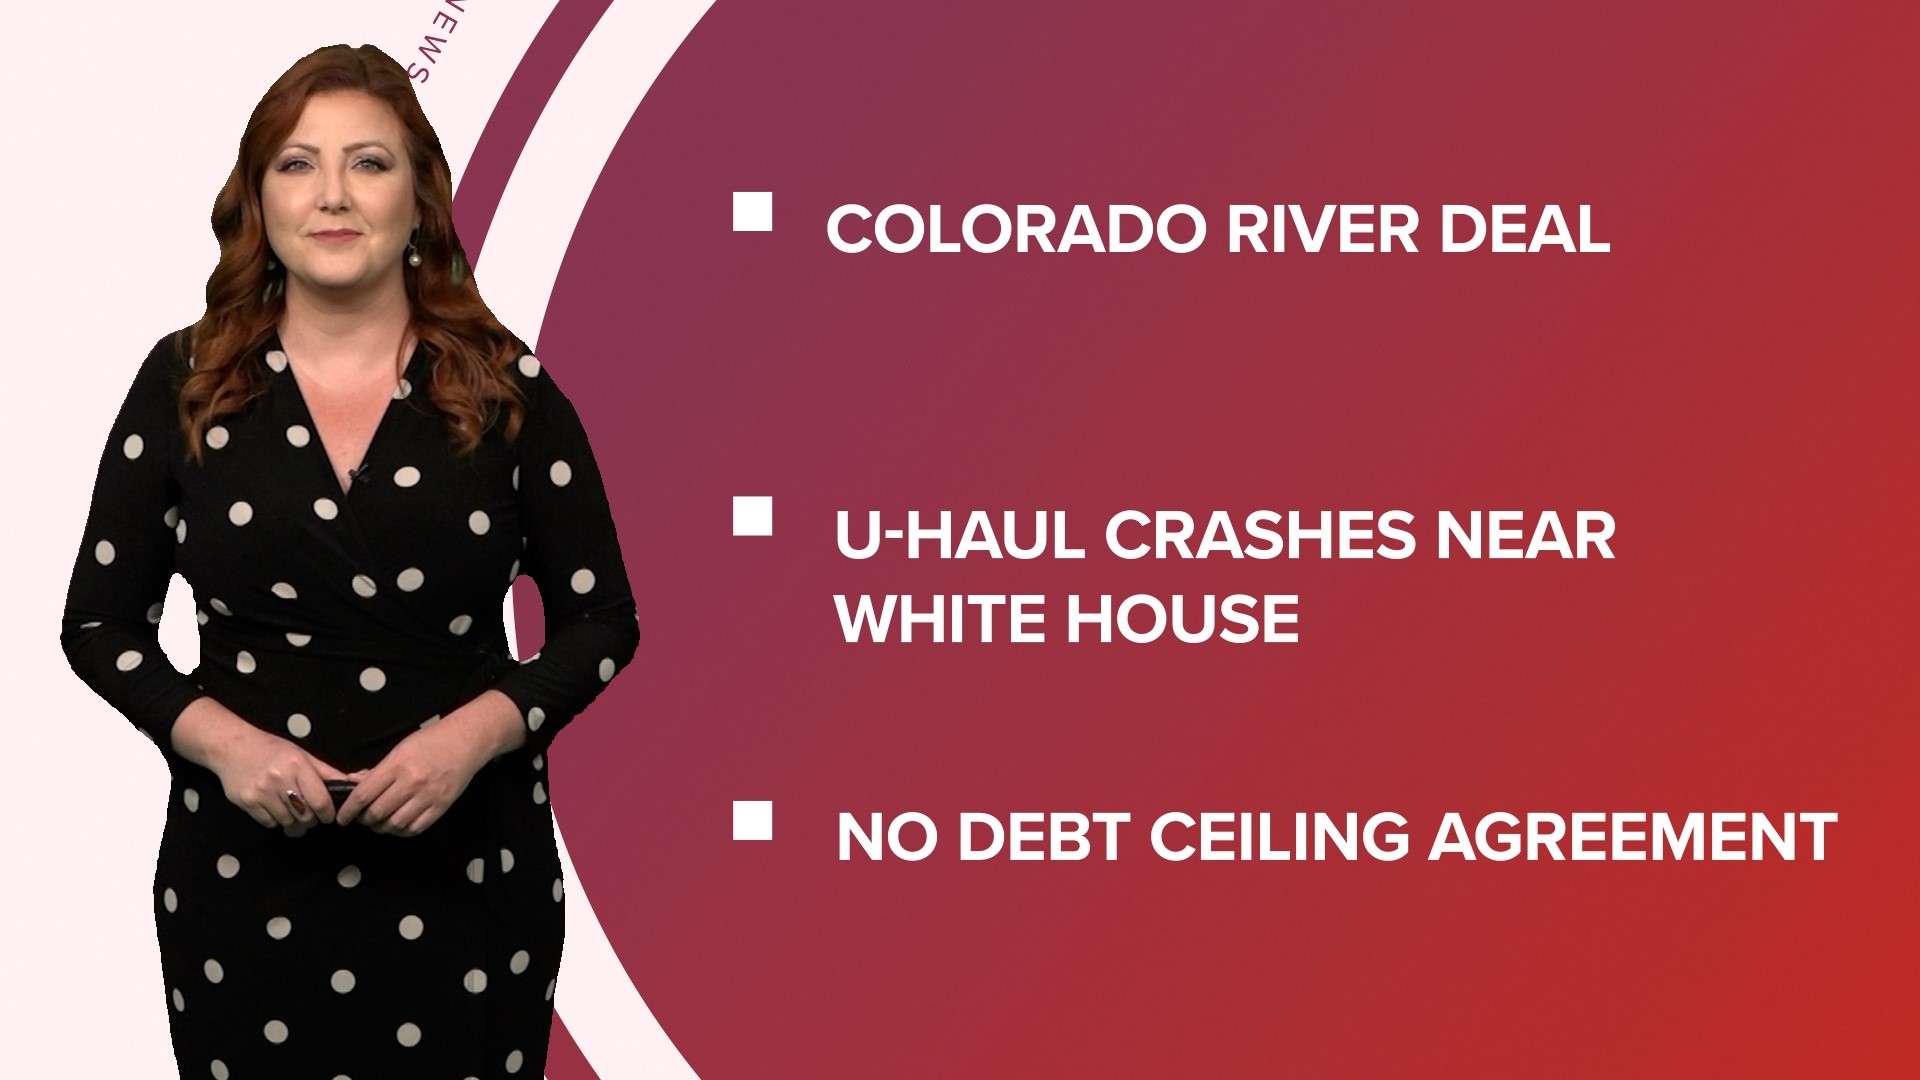 A look at what is happening in the news from a deal made to conserve water in the Colorado River to the Denver Nuggets sweeping the Lakers.